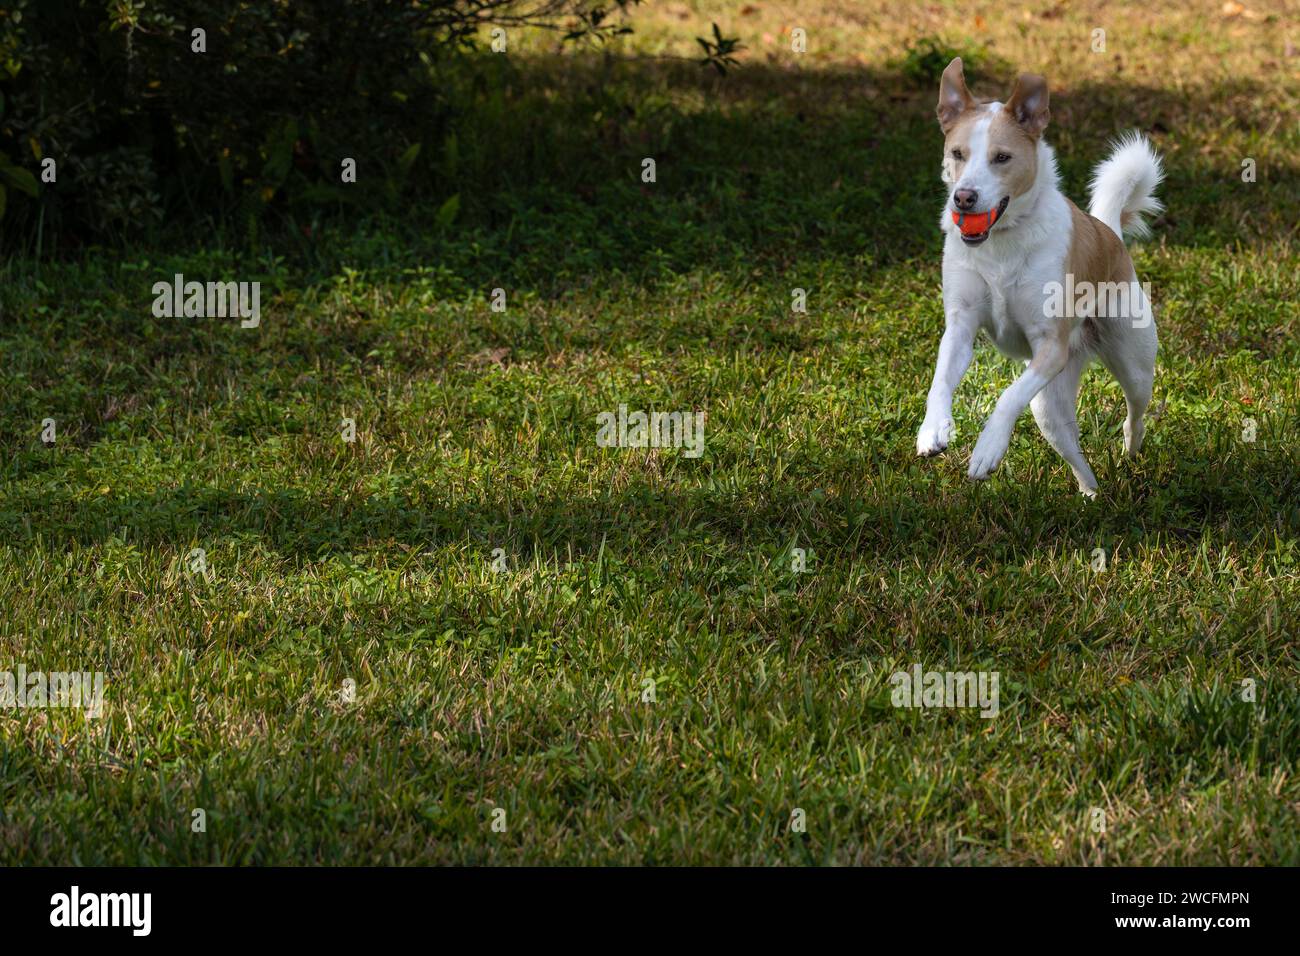 Dog running with ball in mouth Stock Photo